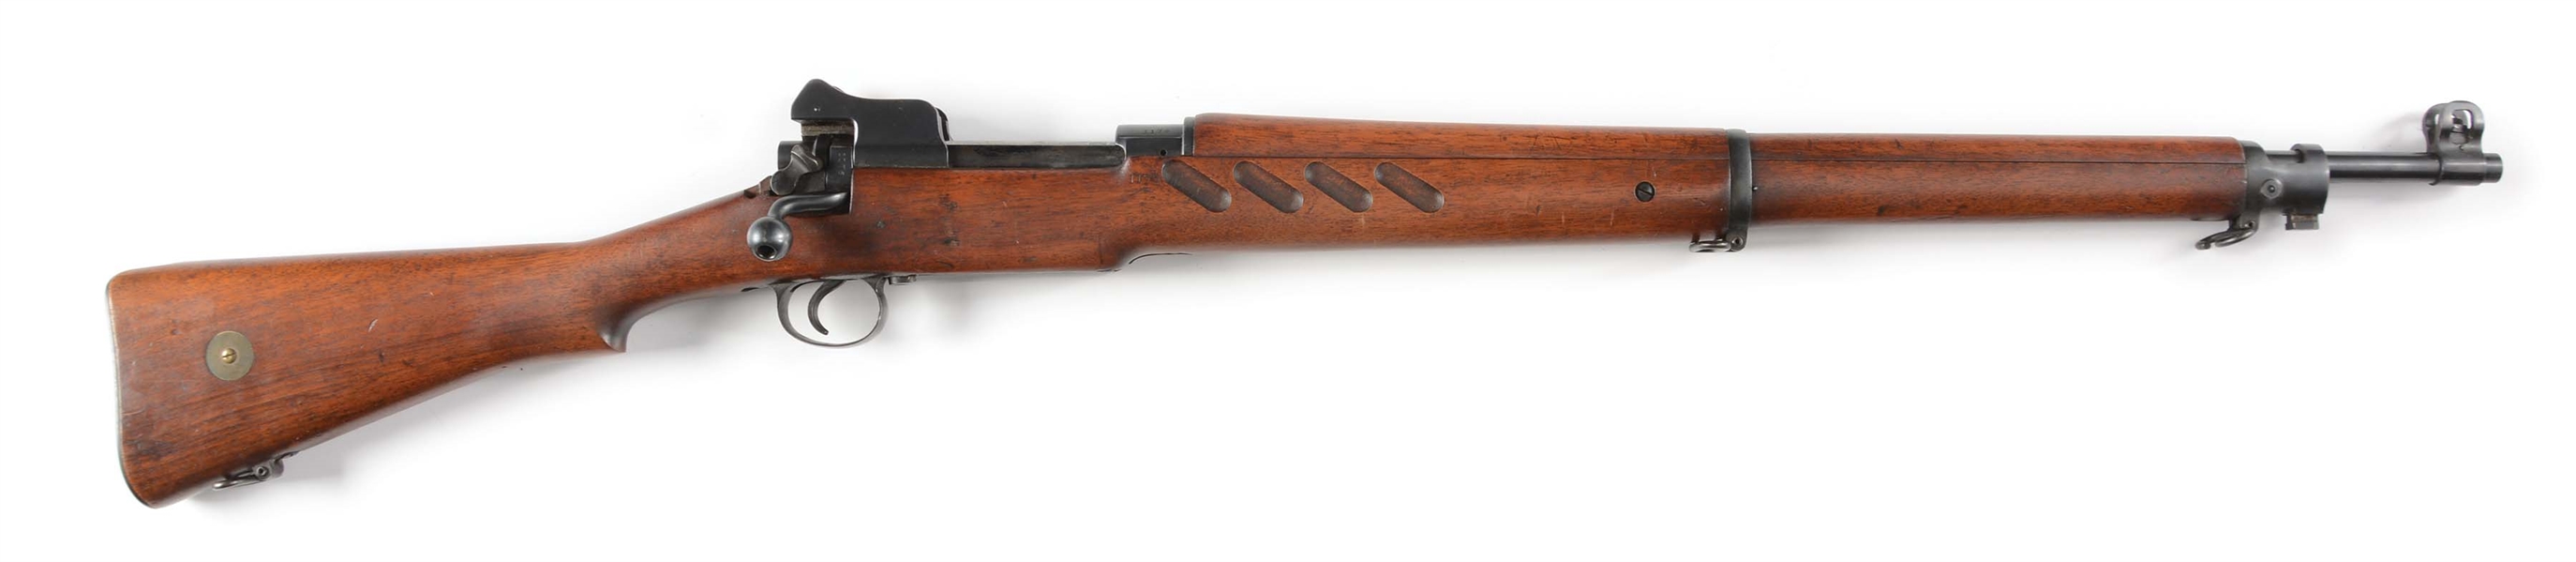 (C) ENFIELD PATTERN 1913 TRIALS BOLT ACTION RIFLE.